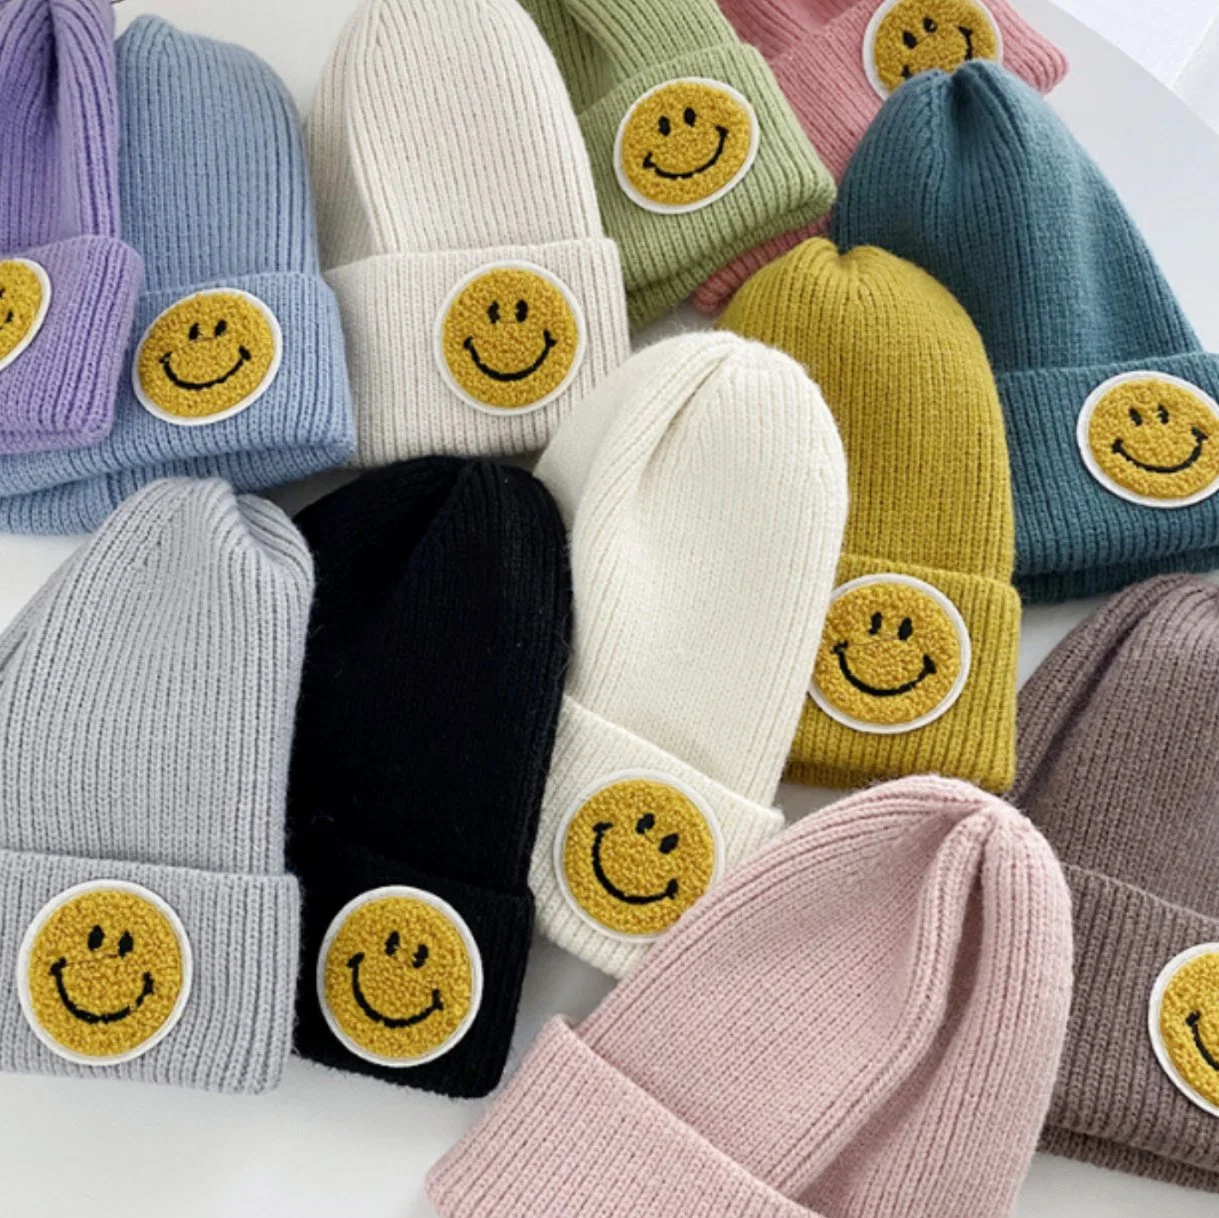 Hot Sale Winter Warm Knitted Toque Candy Colors Cuffed Plain Dyed Beanie Hat with Smiley Face